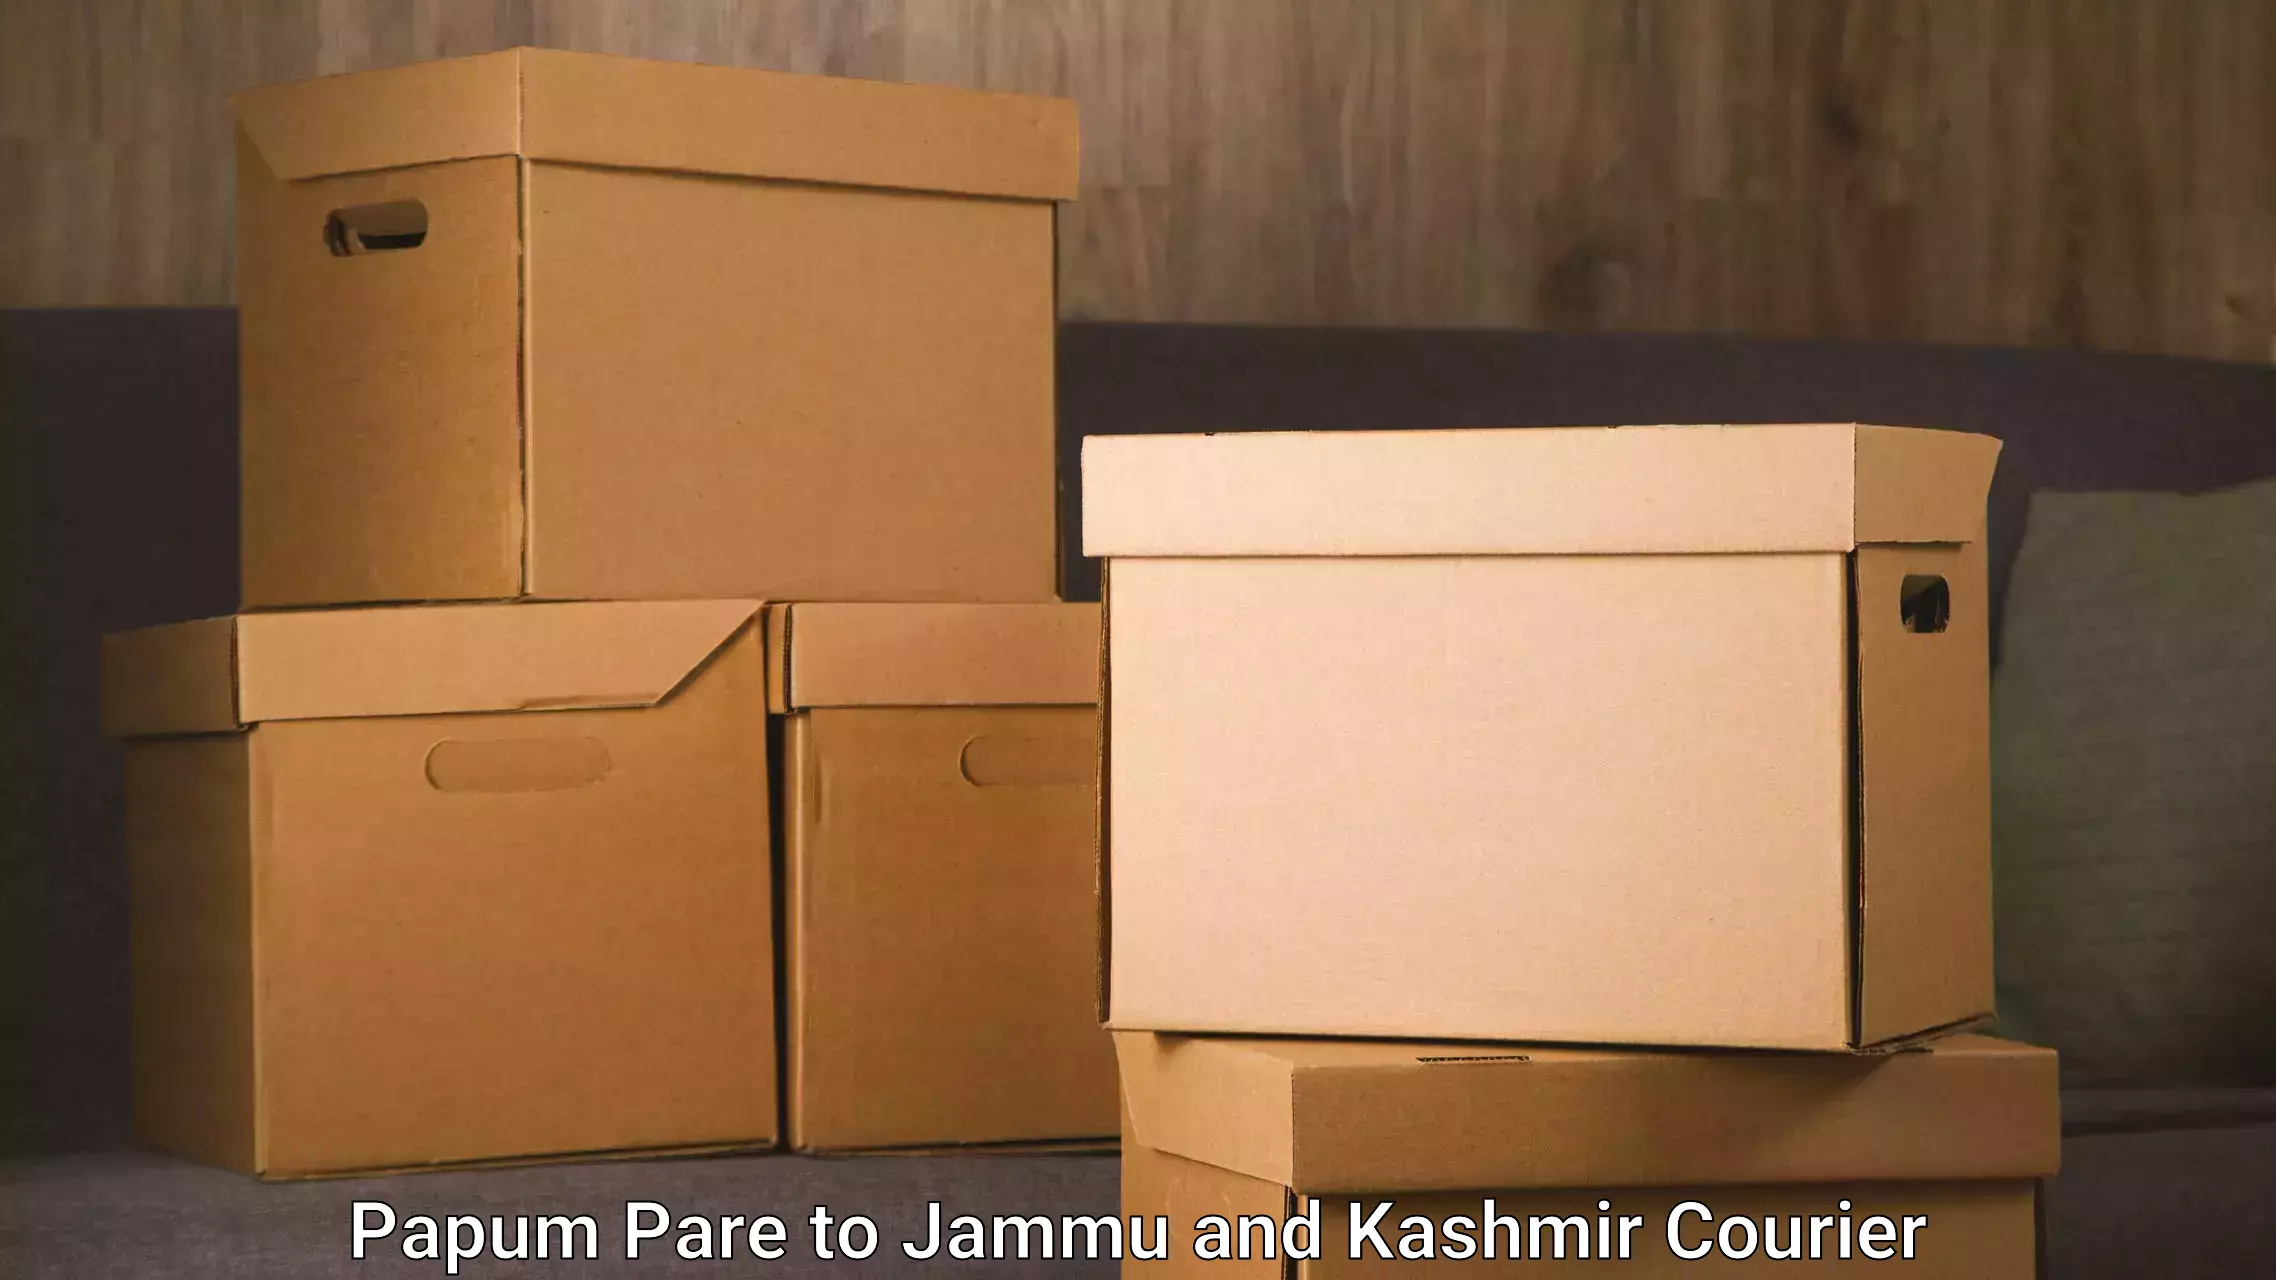 Reliable delivery network Papum Pare to Rajouri